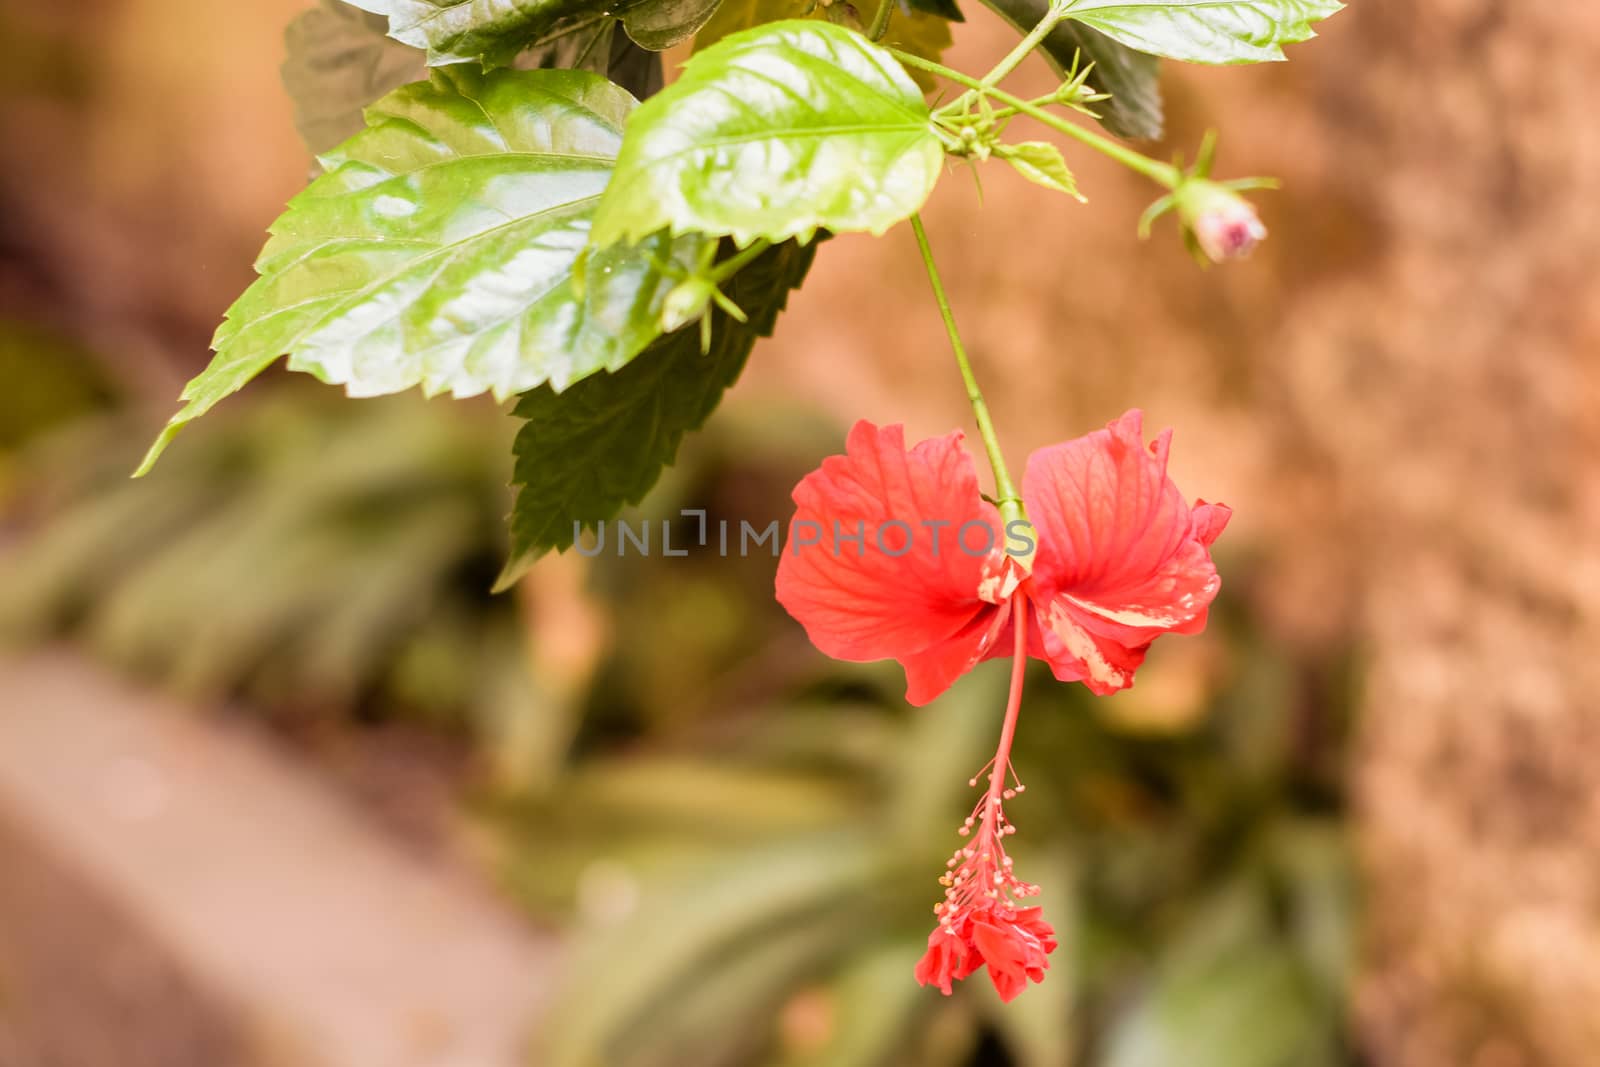 One Chaba flower (Hibiscus rosa-sinensis) chinese rose, red color, hanging downward, blooming in morning sunlight in isolated background. Vintage film look, With copy space room for text on left side. by sudiptabhowmick